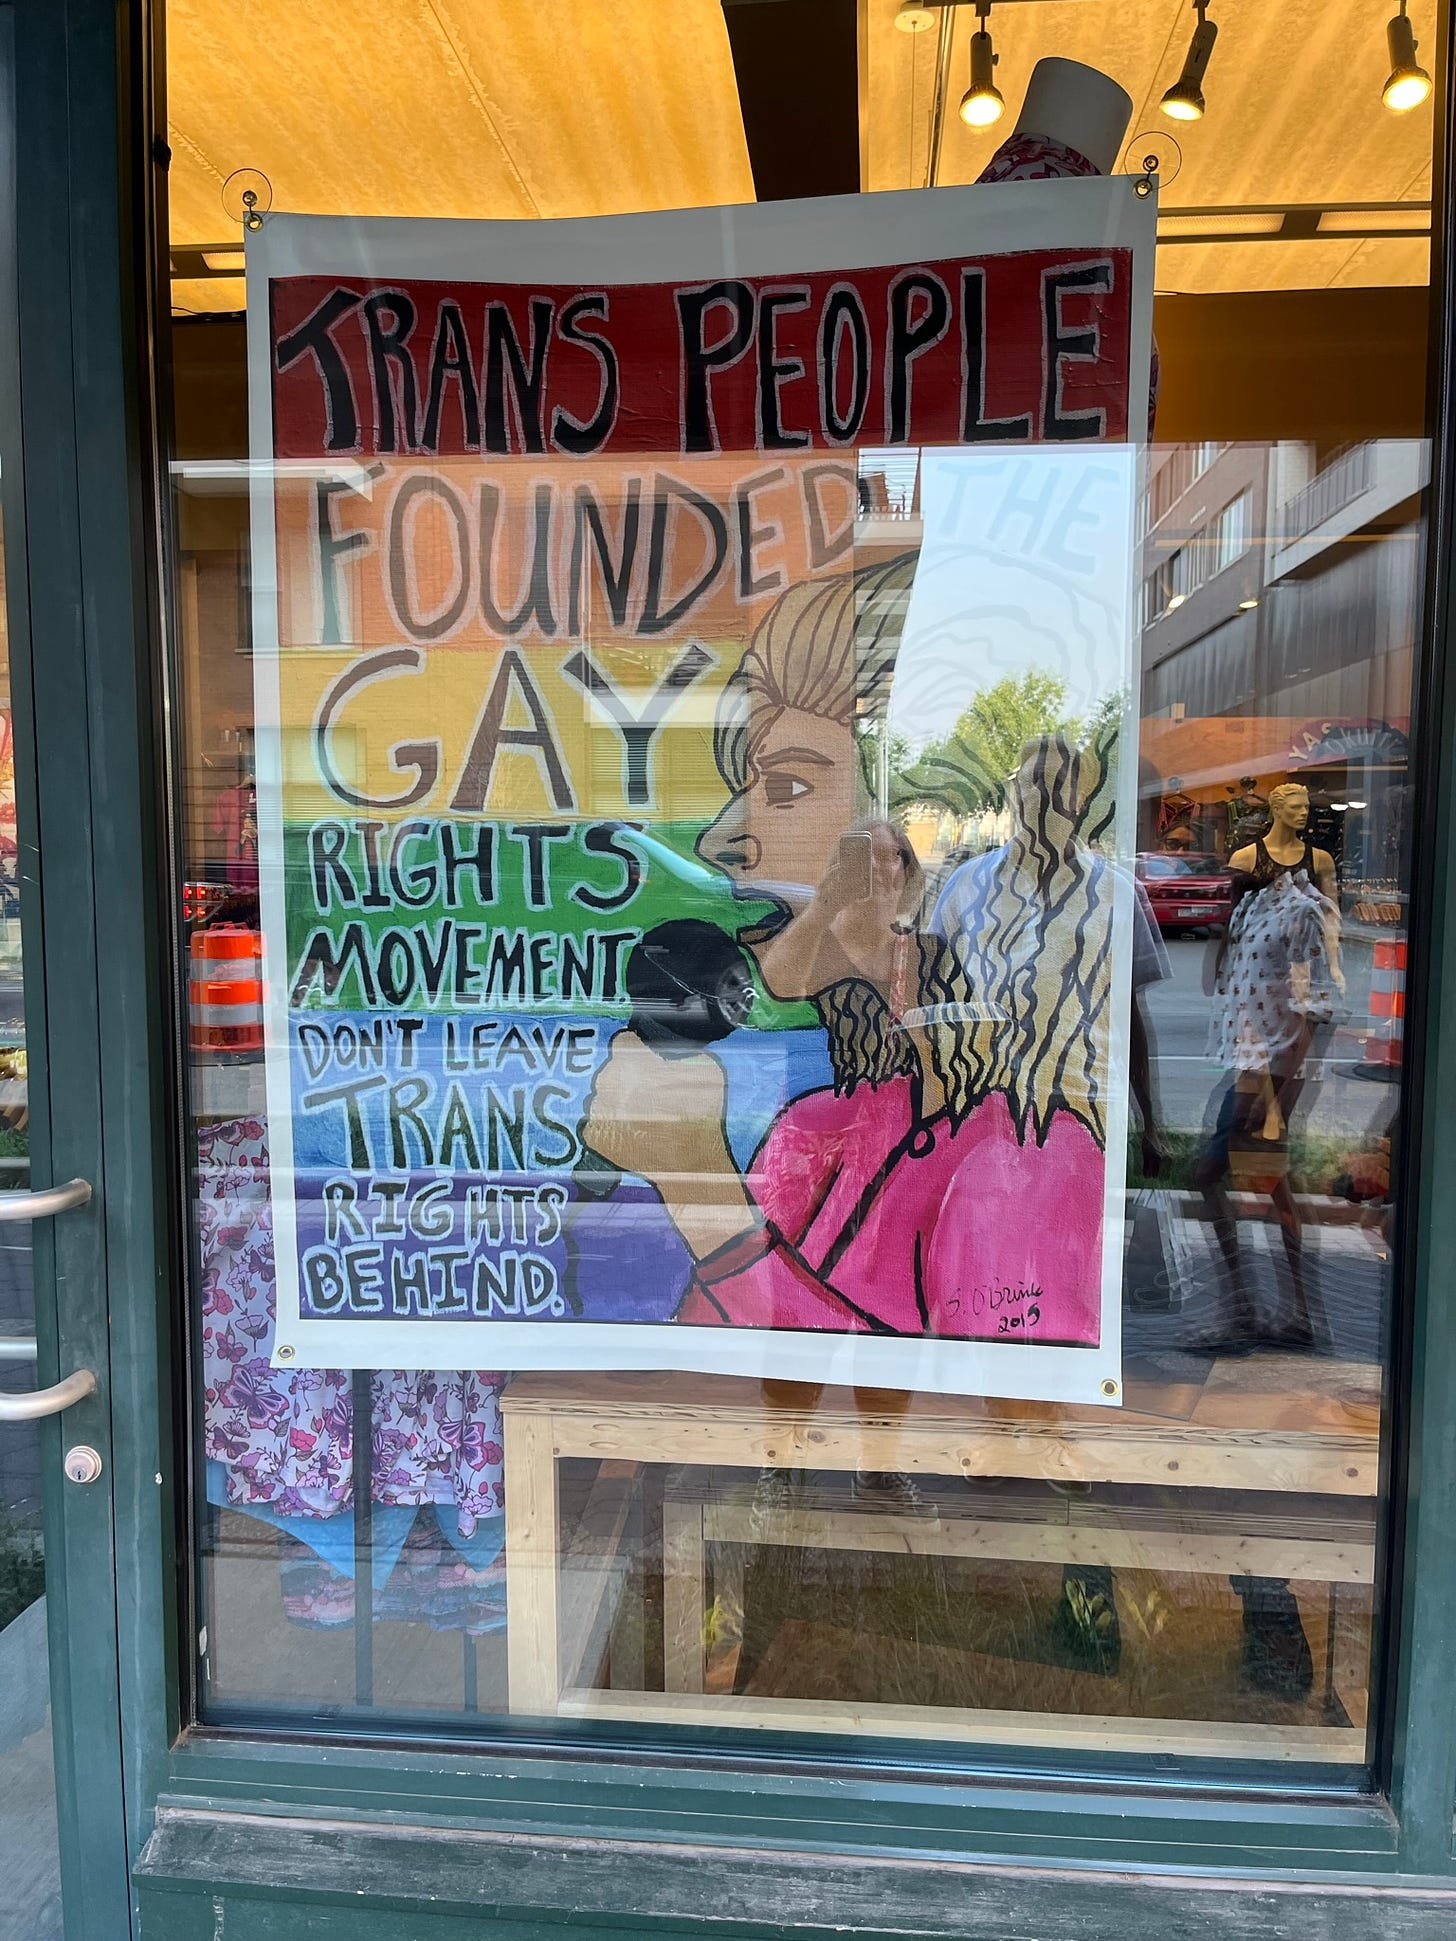 Sign in a shop window that says, "Trans people founded gay rights movement. Don't leave them behind."